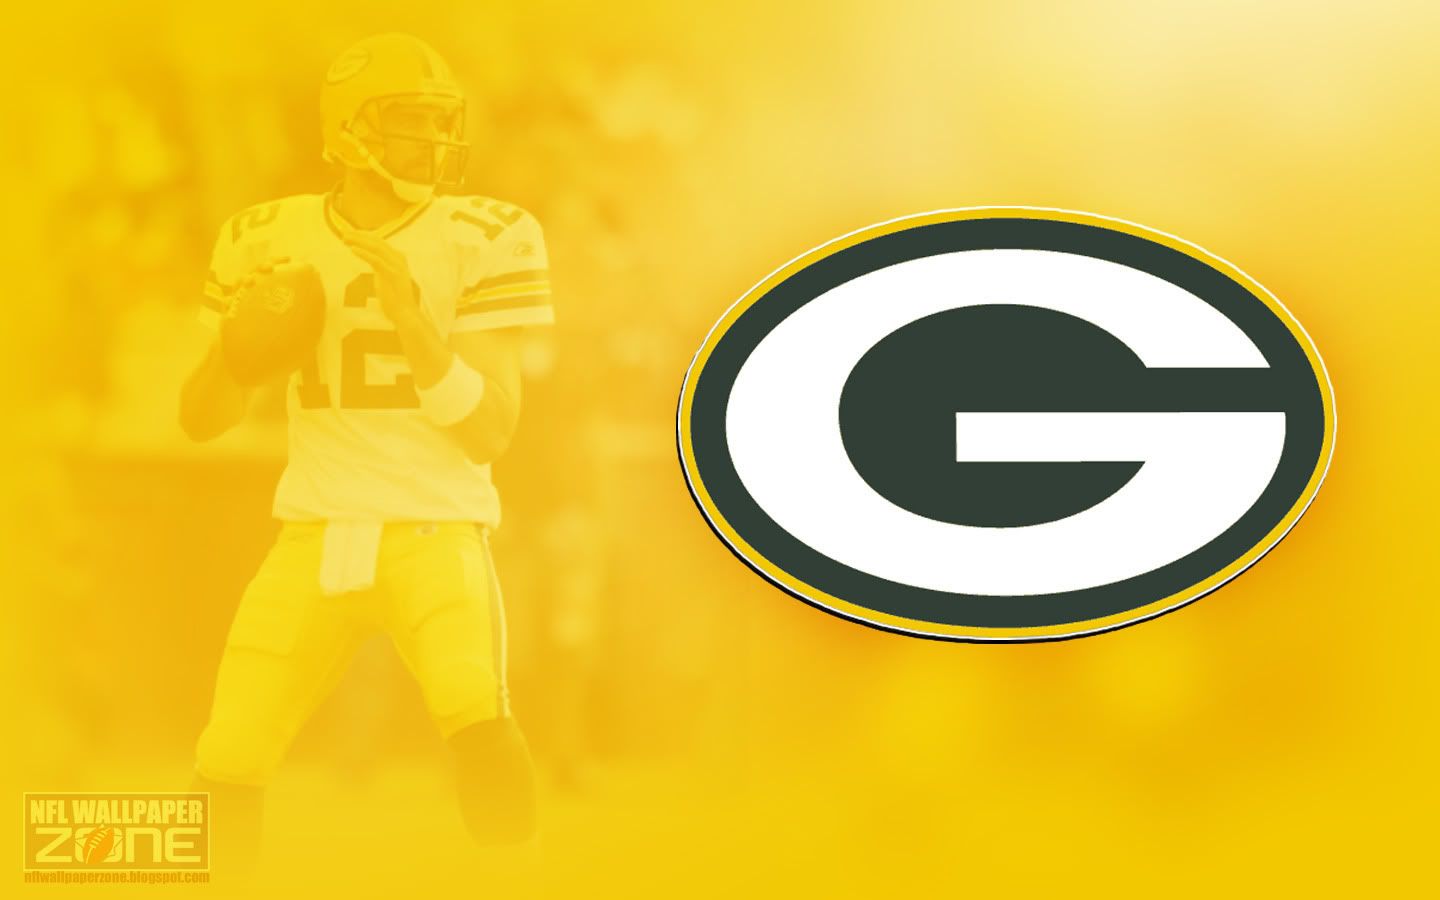 Green Bay Packers Pictures, Images & Photos | Photobucket